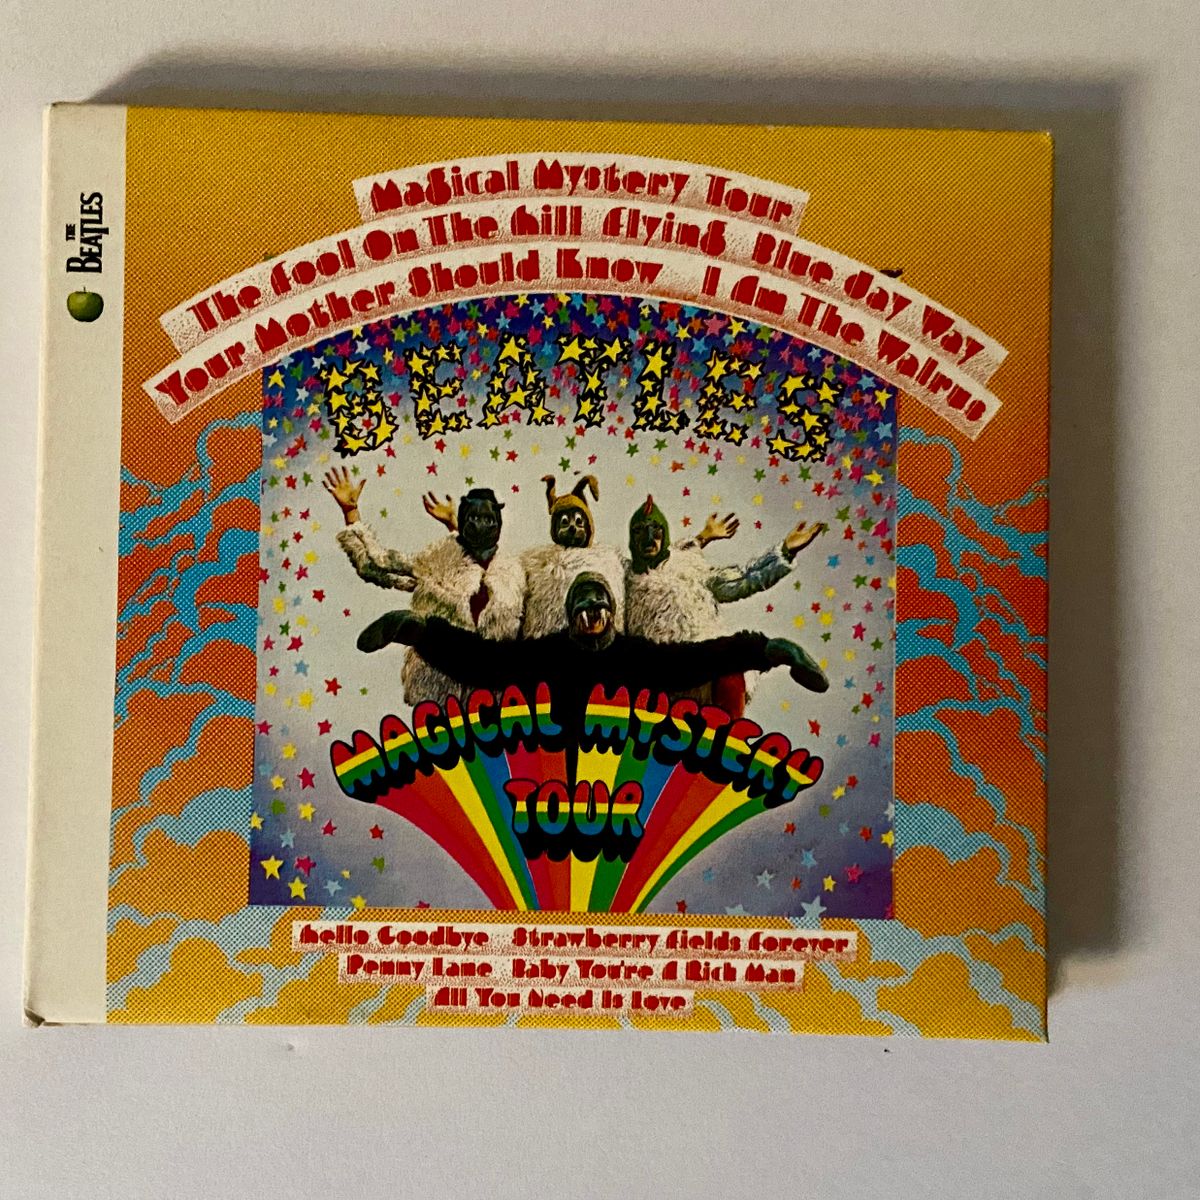 magical mystery tour remastered 2009